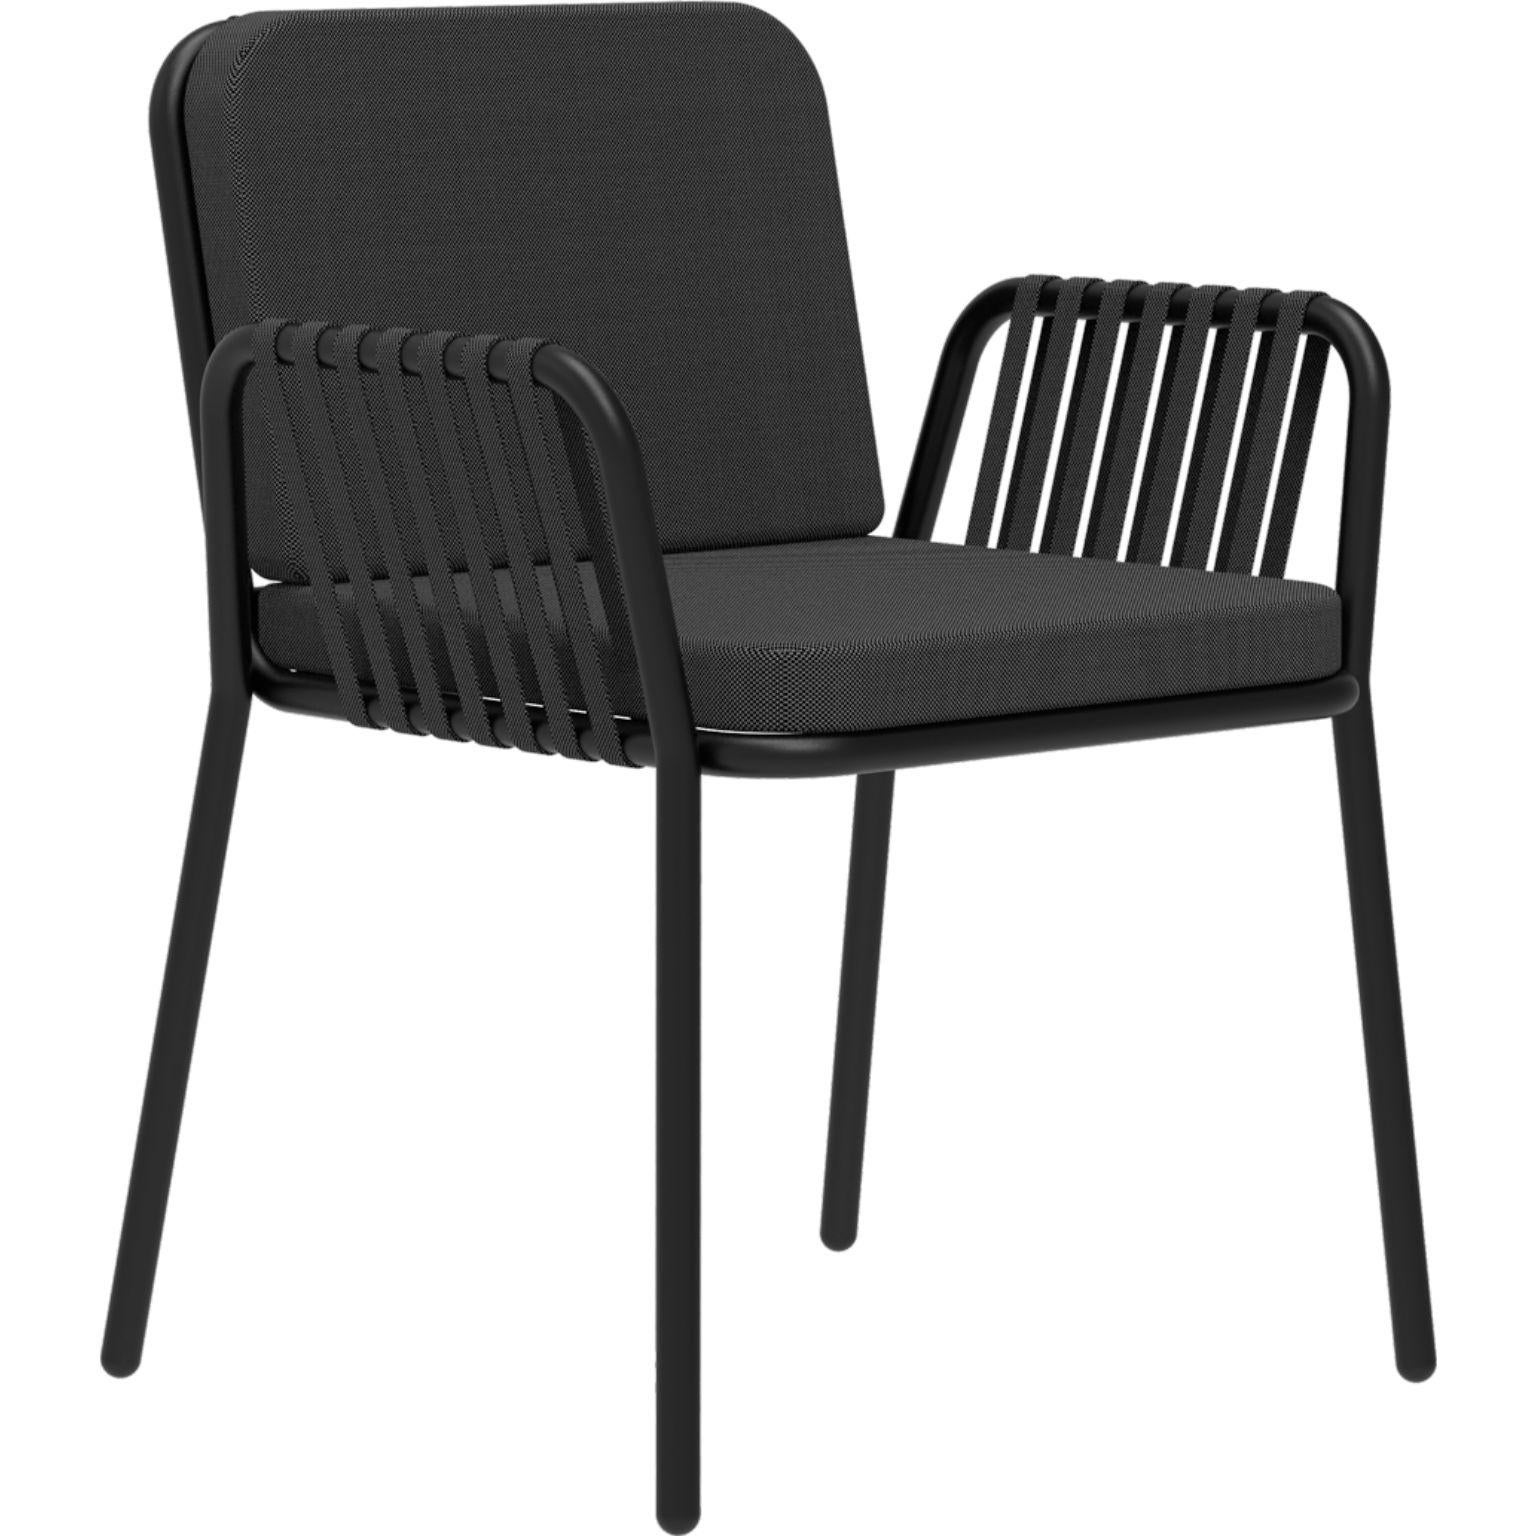 Ribbons black armchair by MOWEE
Dimensions: D60 x W62 x H83 cm (seat height 48).
Material: Aluminum and upholstery.
Weight: 5 kg.
Also available in different colors and finishes.

An unmistakable collection for its beauty and robustness. A